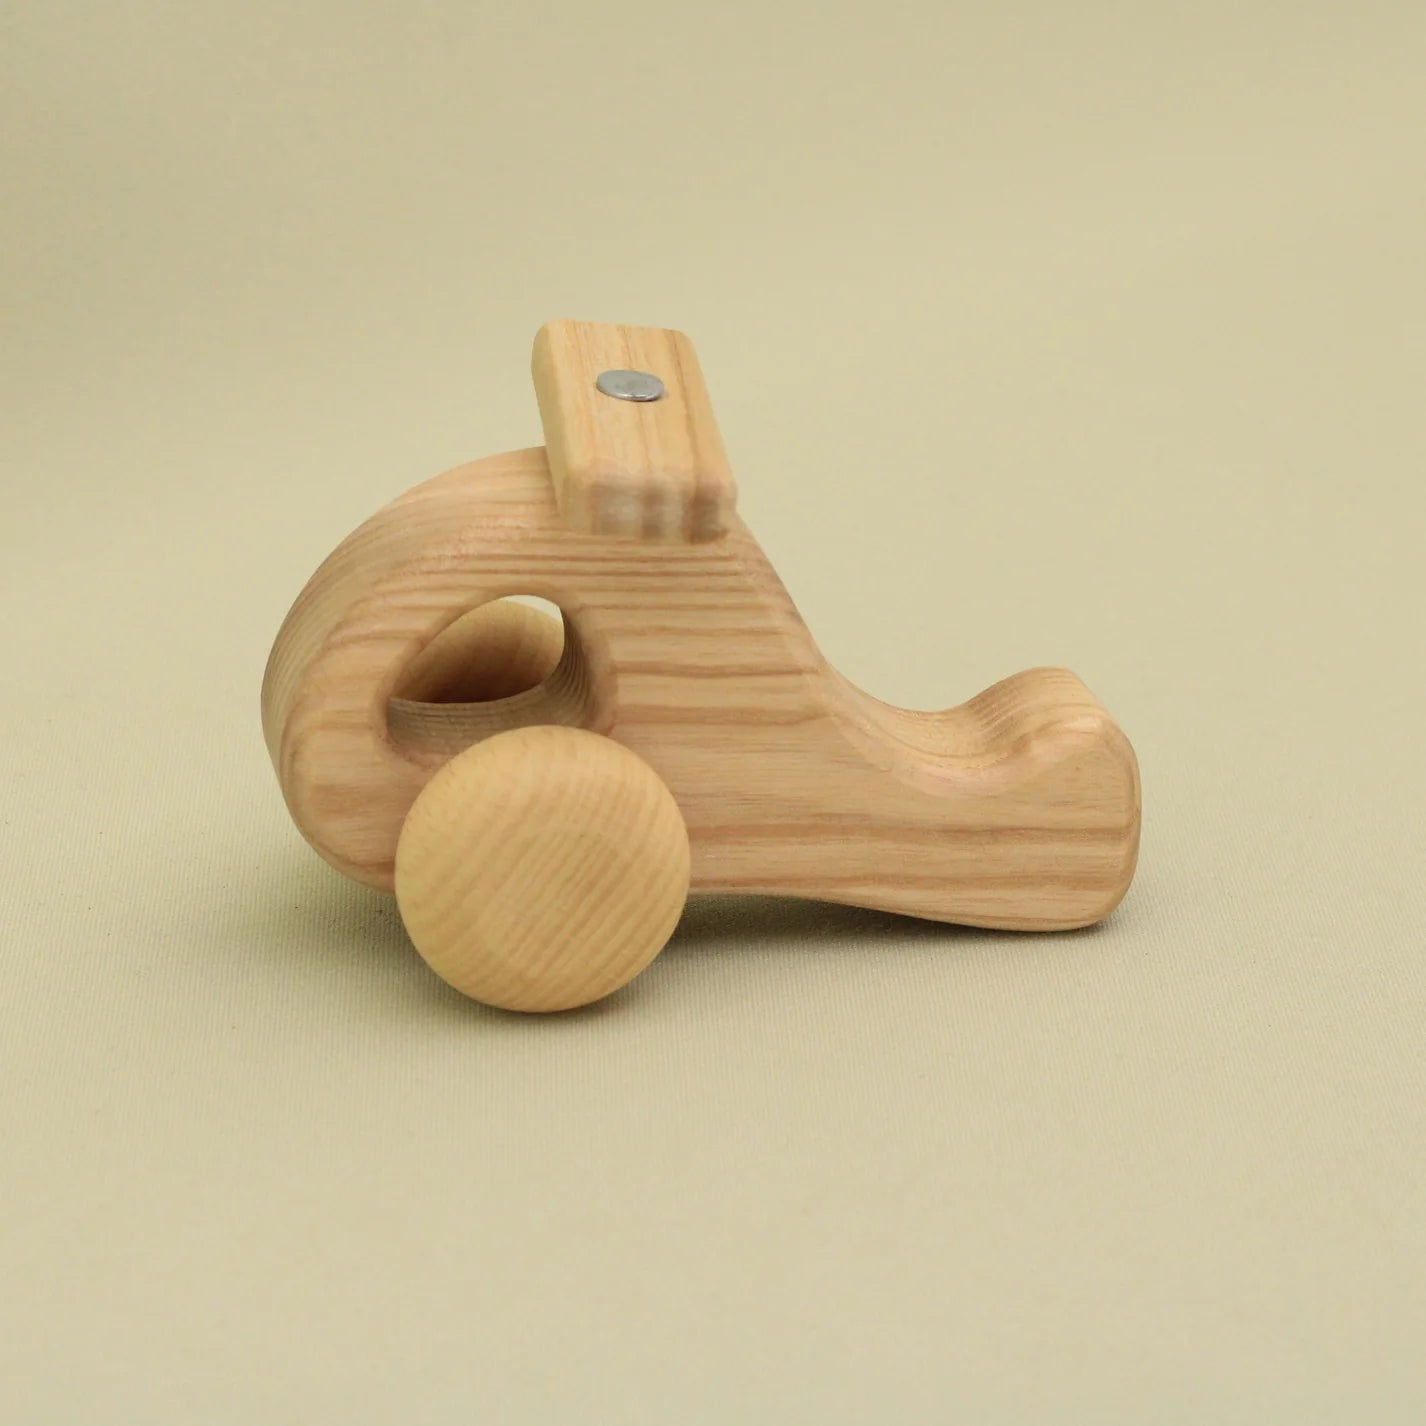 Mini Wooden Eco Friendly Natural Toy Helicopter